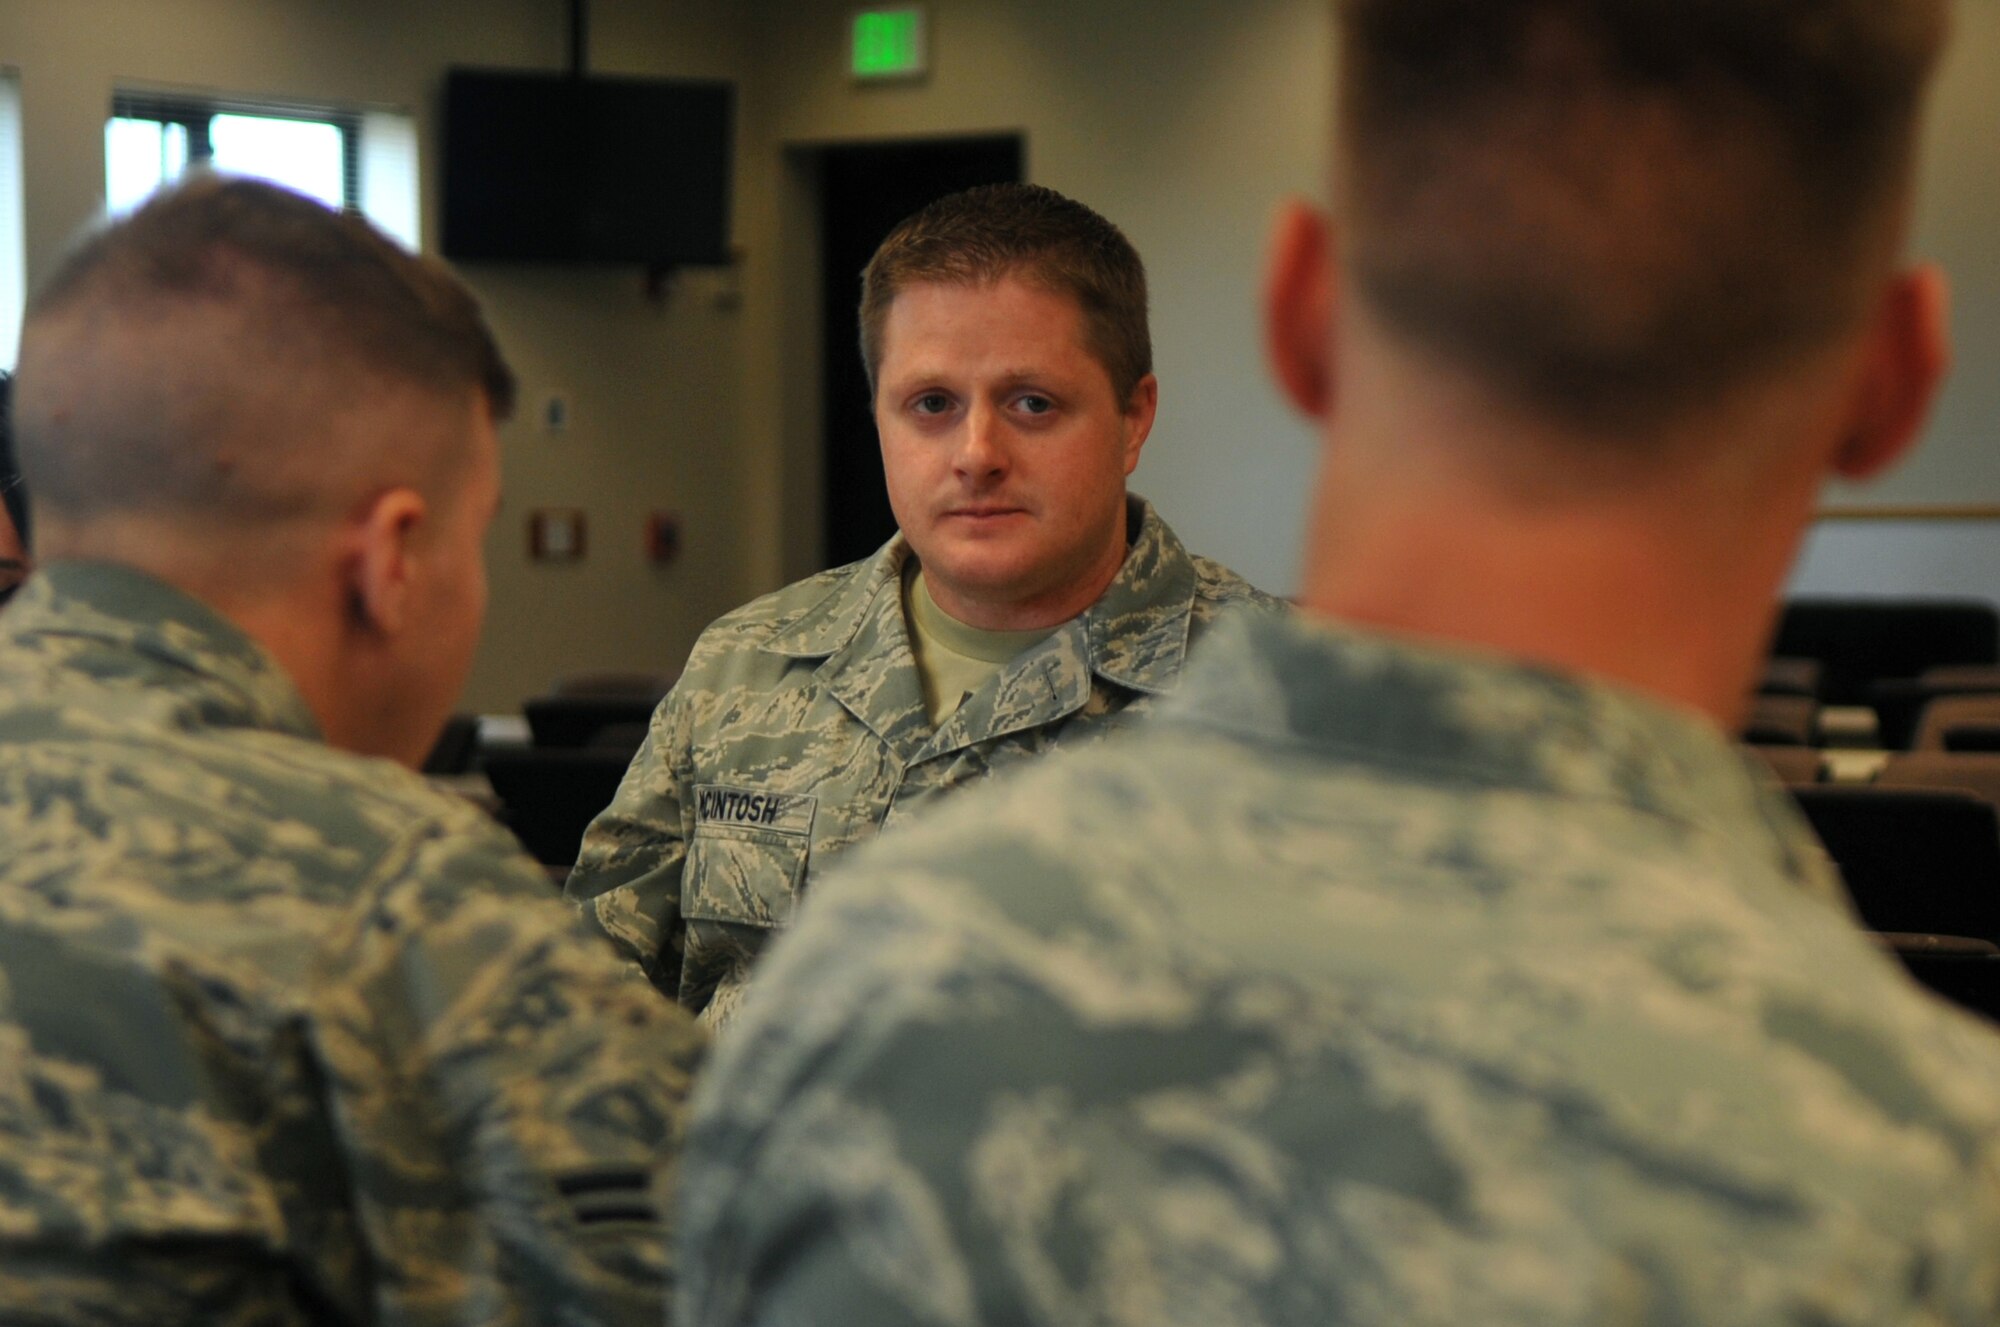 Tech. Sgt. John McIntosh, Buckley Air Force Base Chapel operations NCO in charge, sits with new Airmen during lunch September 15, 2016, at Buckley AFB, Colo. The role of a chaplain assistant is to provide ministry support through direct unit involvement and administrative and logistical support. (U.S. Air Force photo by Airman Holden S. Faul/ Released) 
